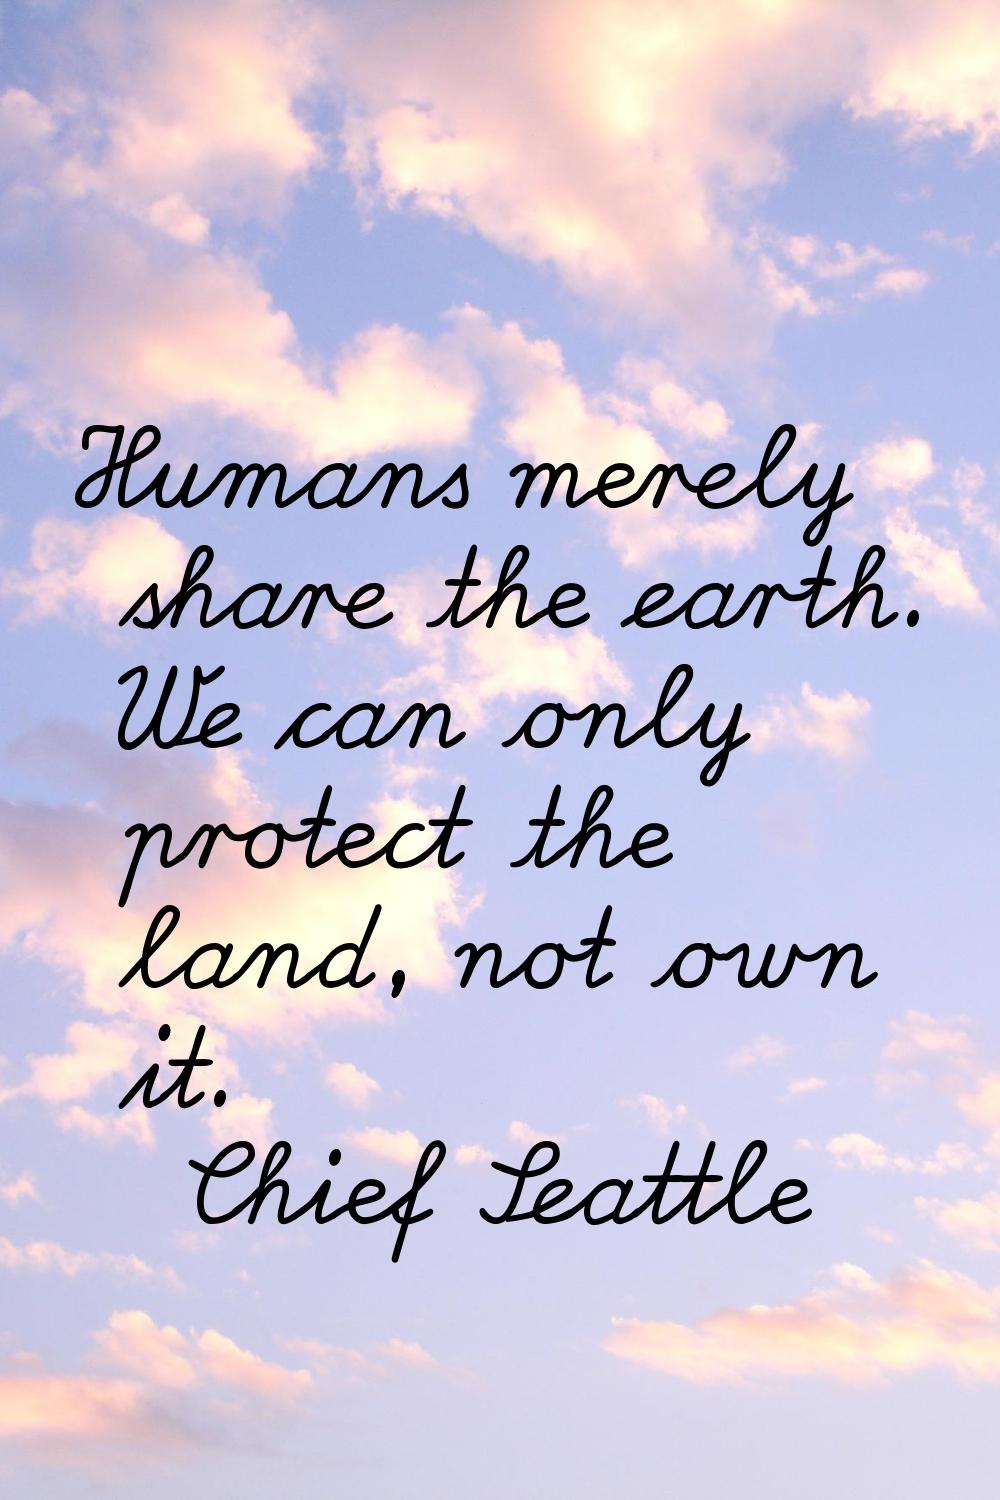 Humans merely share the earth. We can only protect the land, not own it.